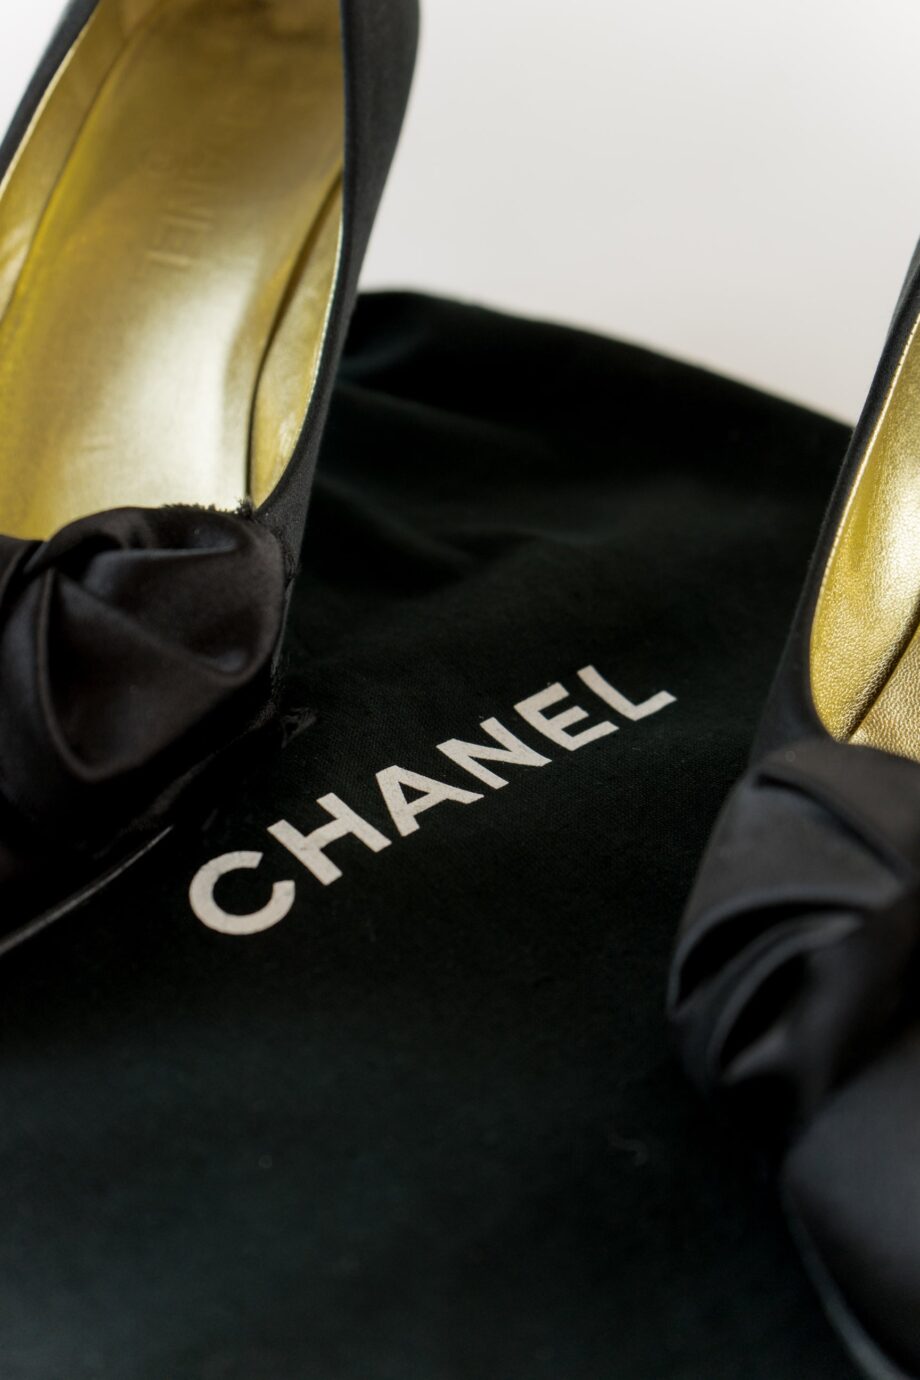 Pre-Loved black Chanel heels with dust bag